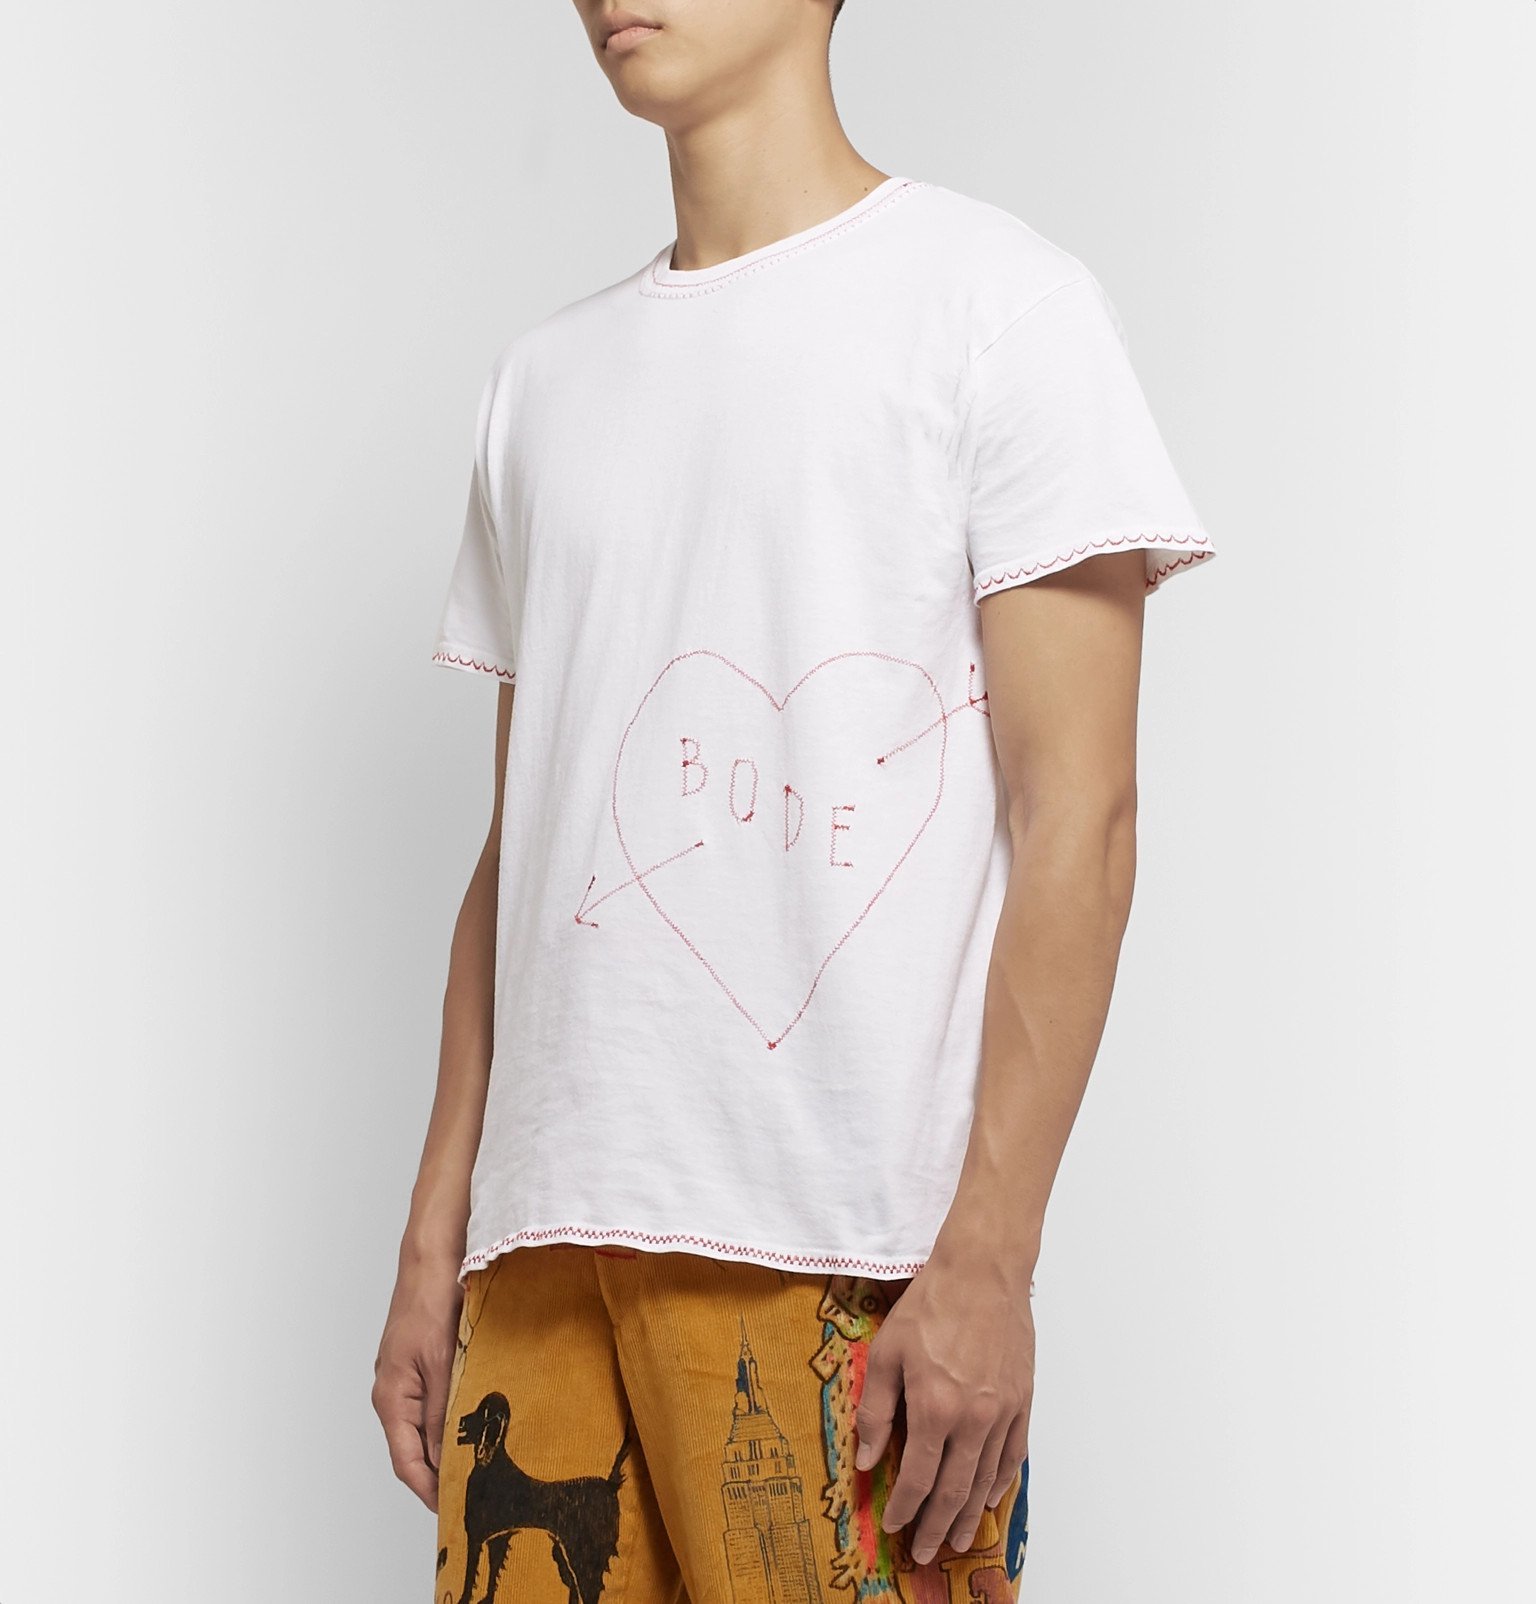 BODE - Embroidered Cotton-Jersey T-Shirt - White Bode